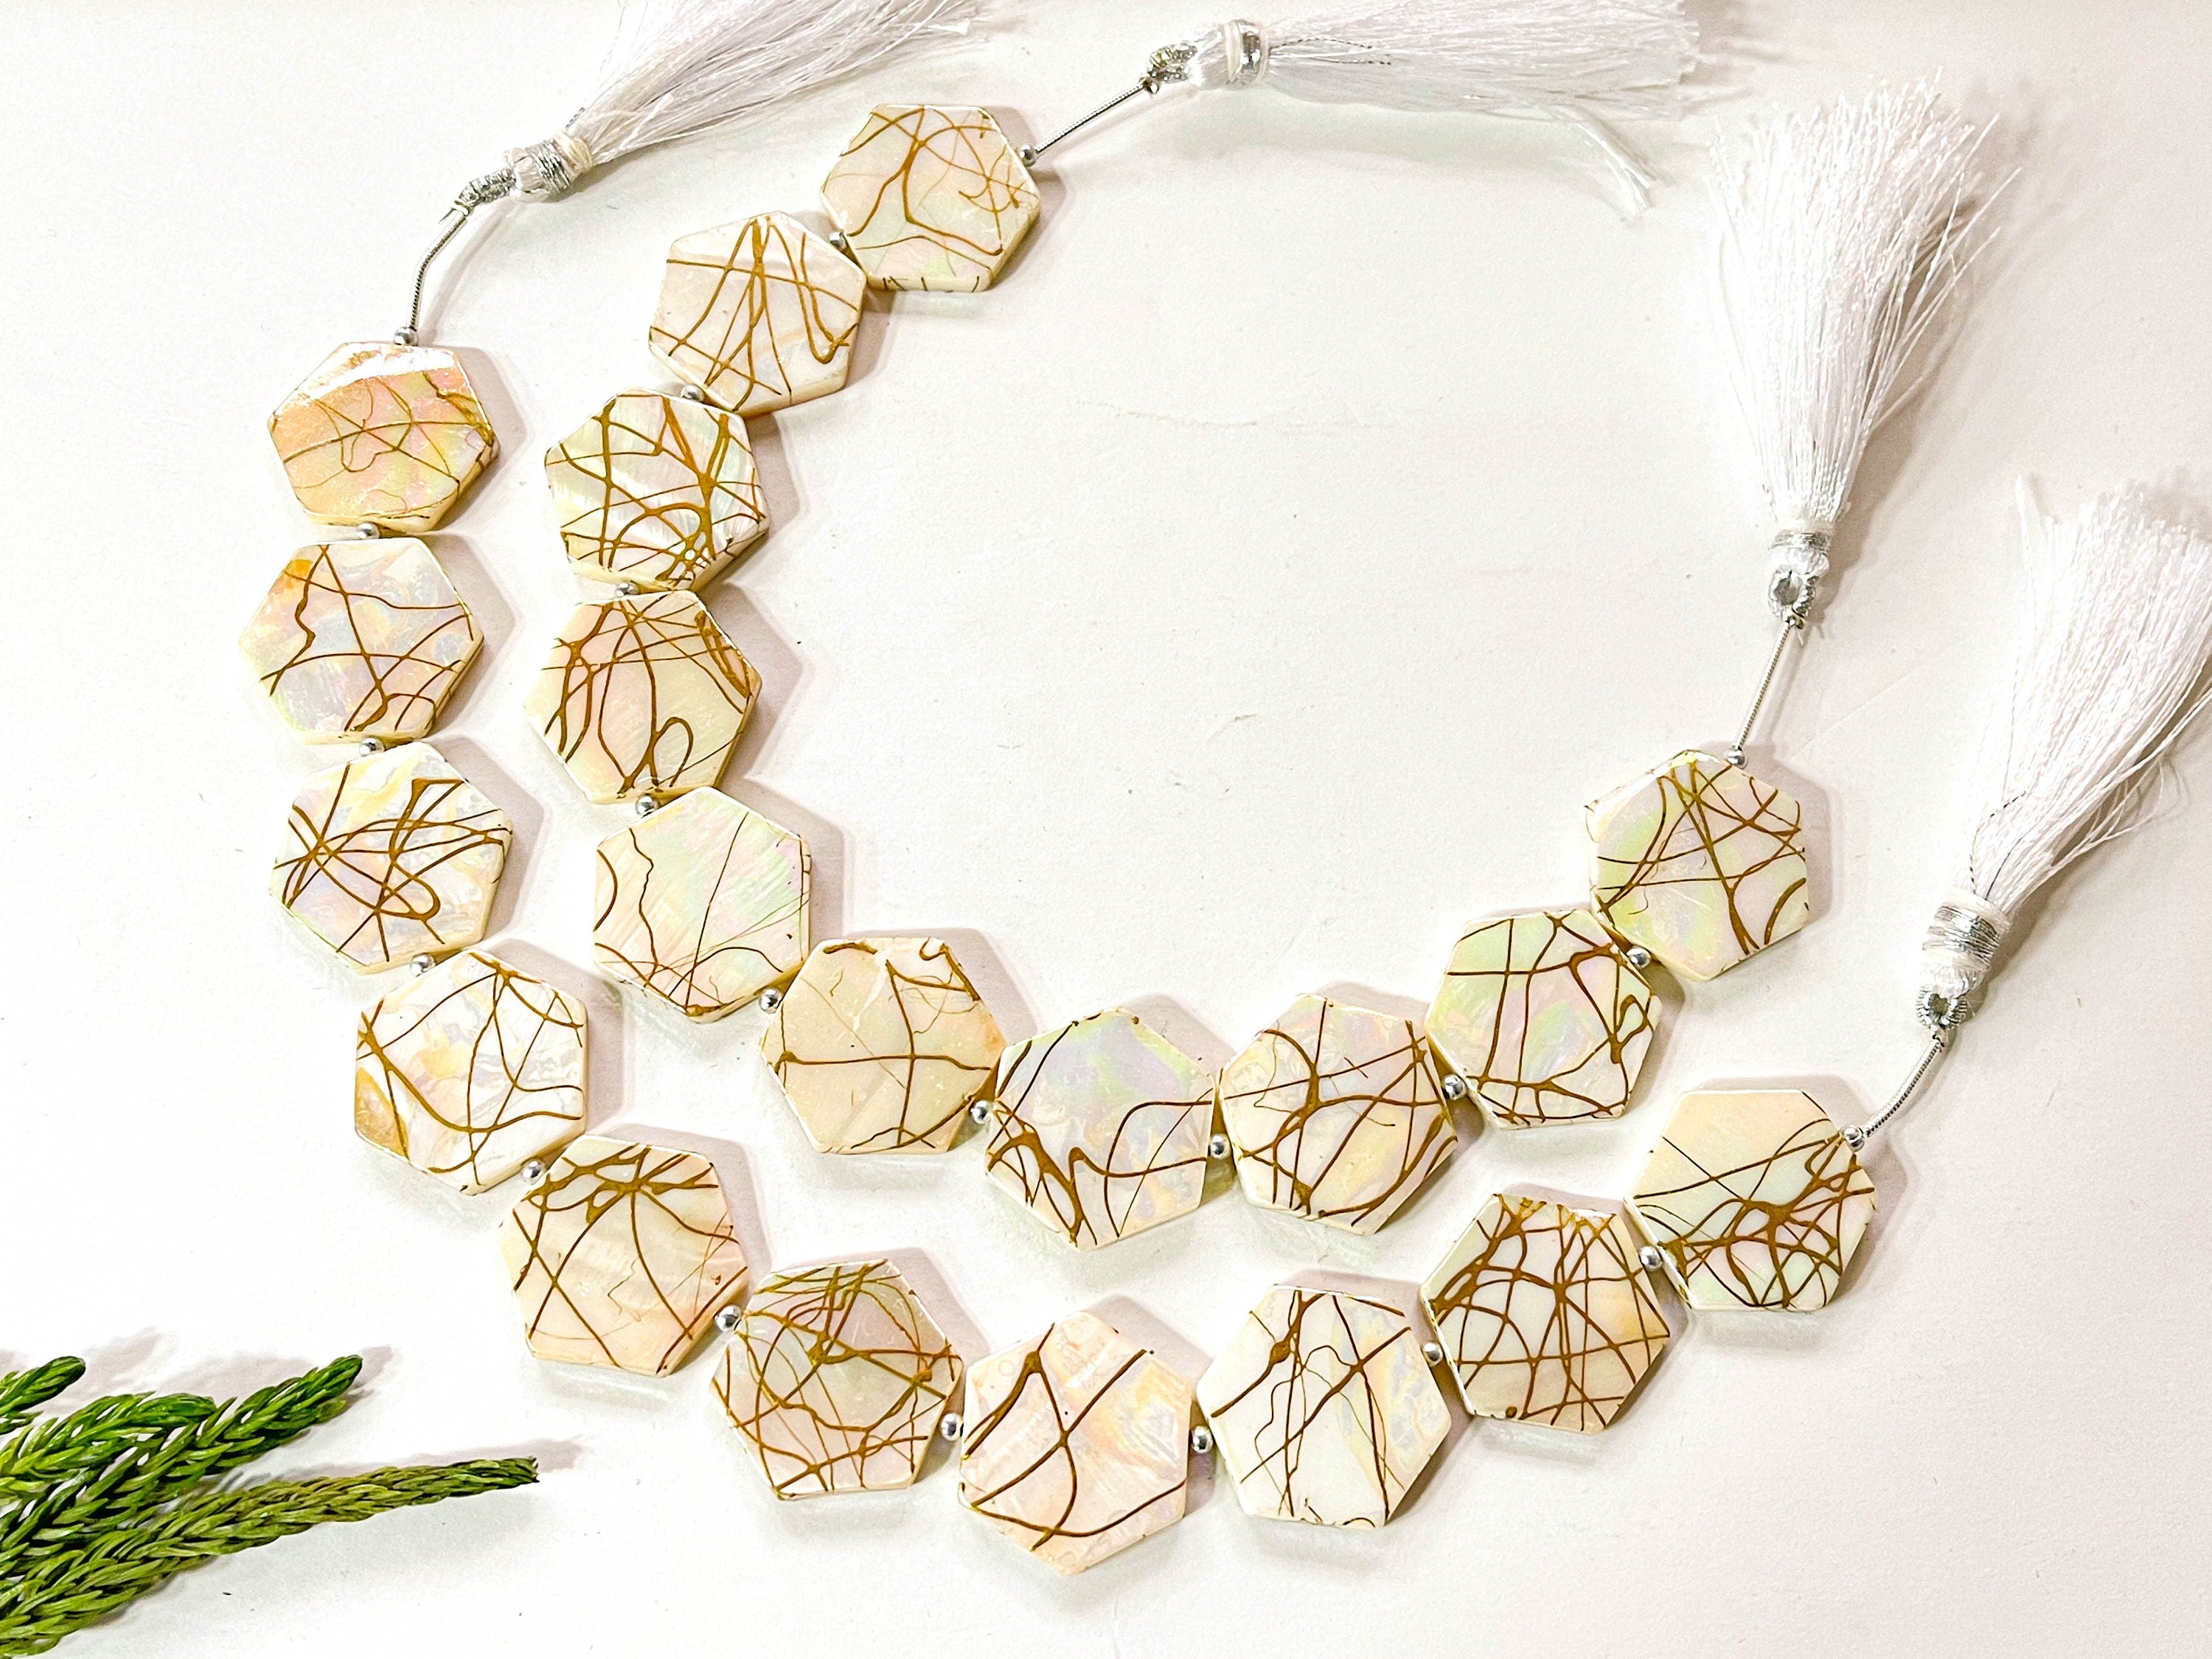 Natural Mother of Pearl with Gold Color Coating Beads | Hexagon Shape | 20x20mm | 10 Pieces | 8 Inches | Beadsforyourjewellery Beadsforyourjewelry